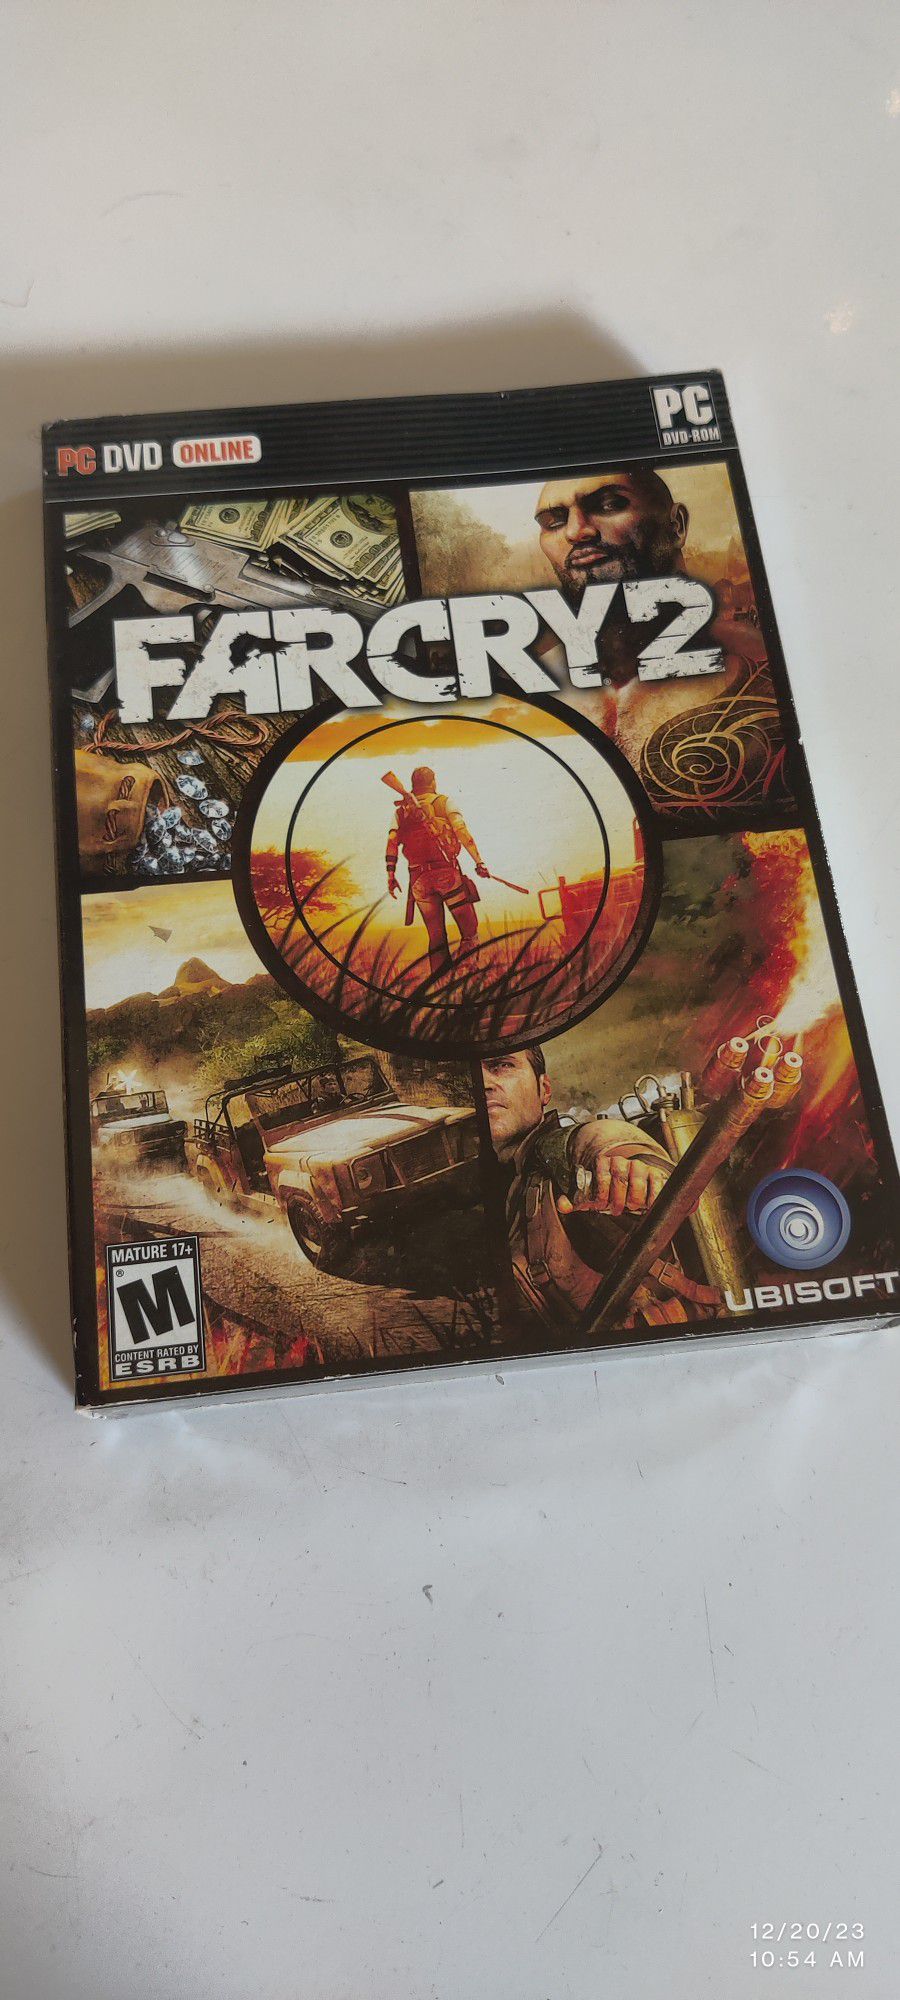 Old Rare Vintage Far Cry 2 (PC / DVD-ROM) BRAND NEW SEALED in the original wrap!! Pc Computer Windows Gamer Gaming 